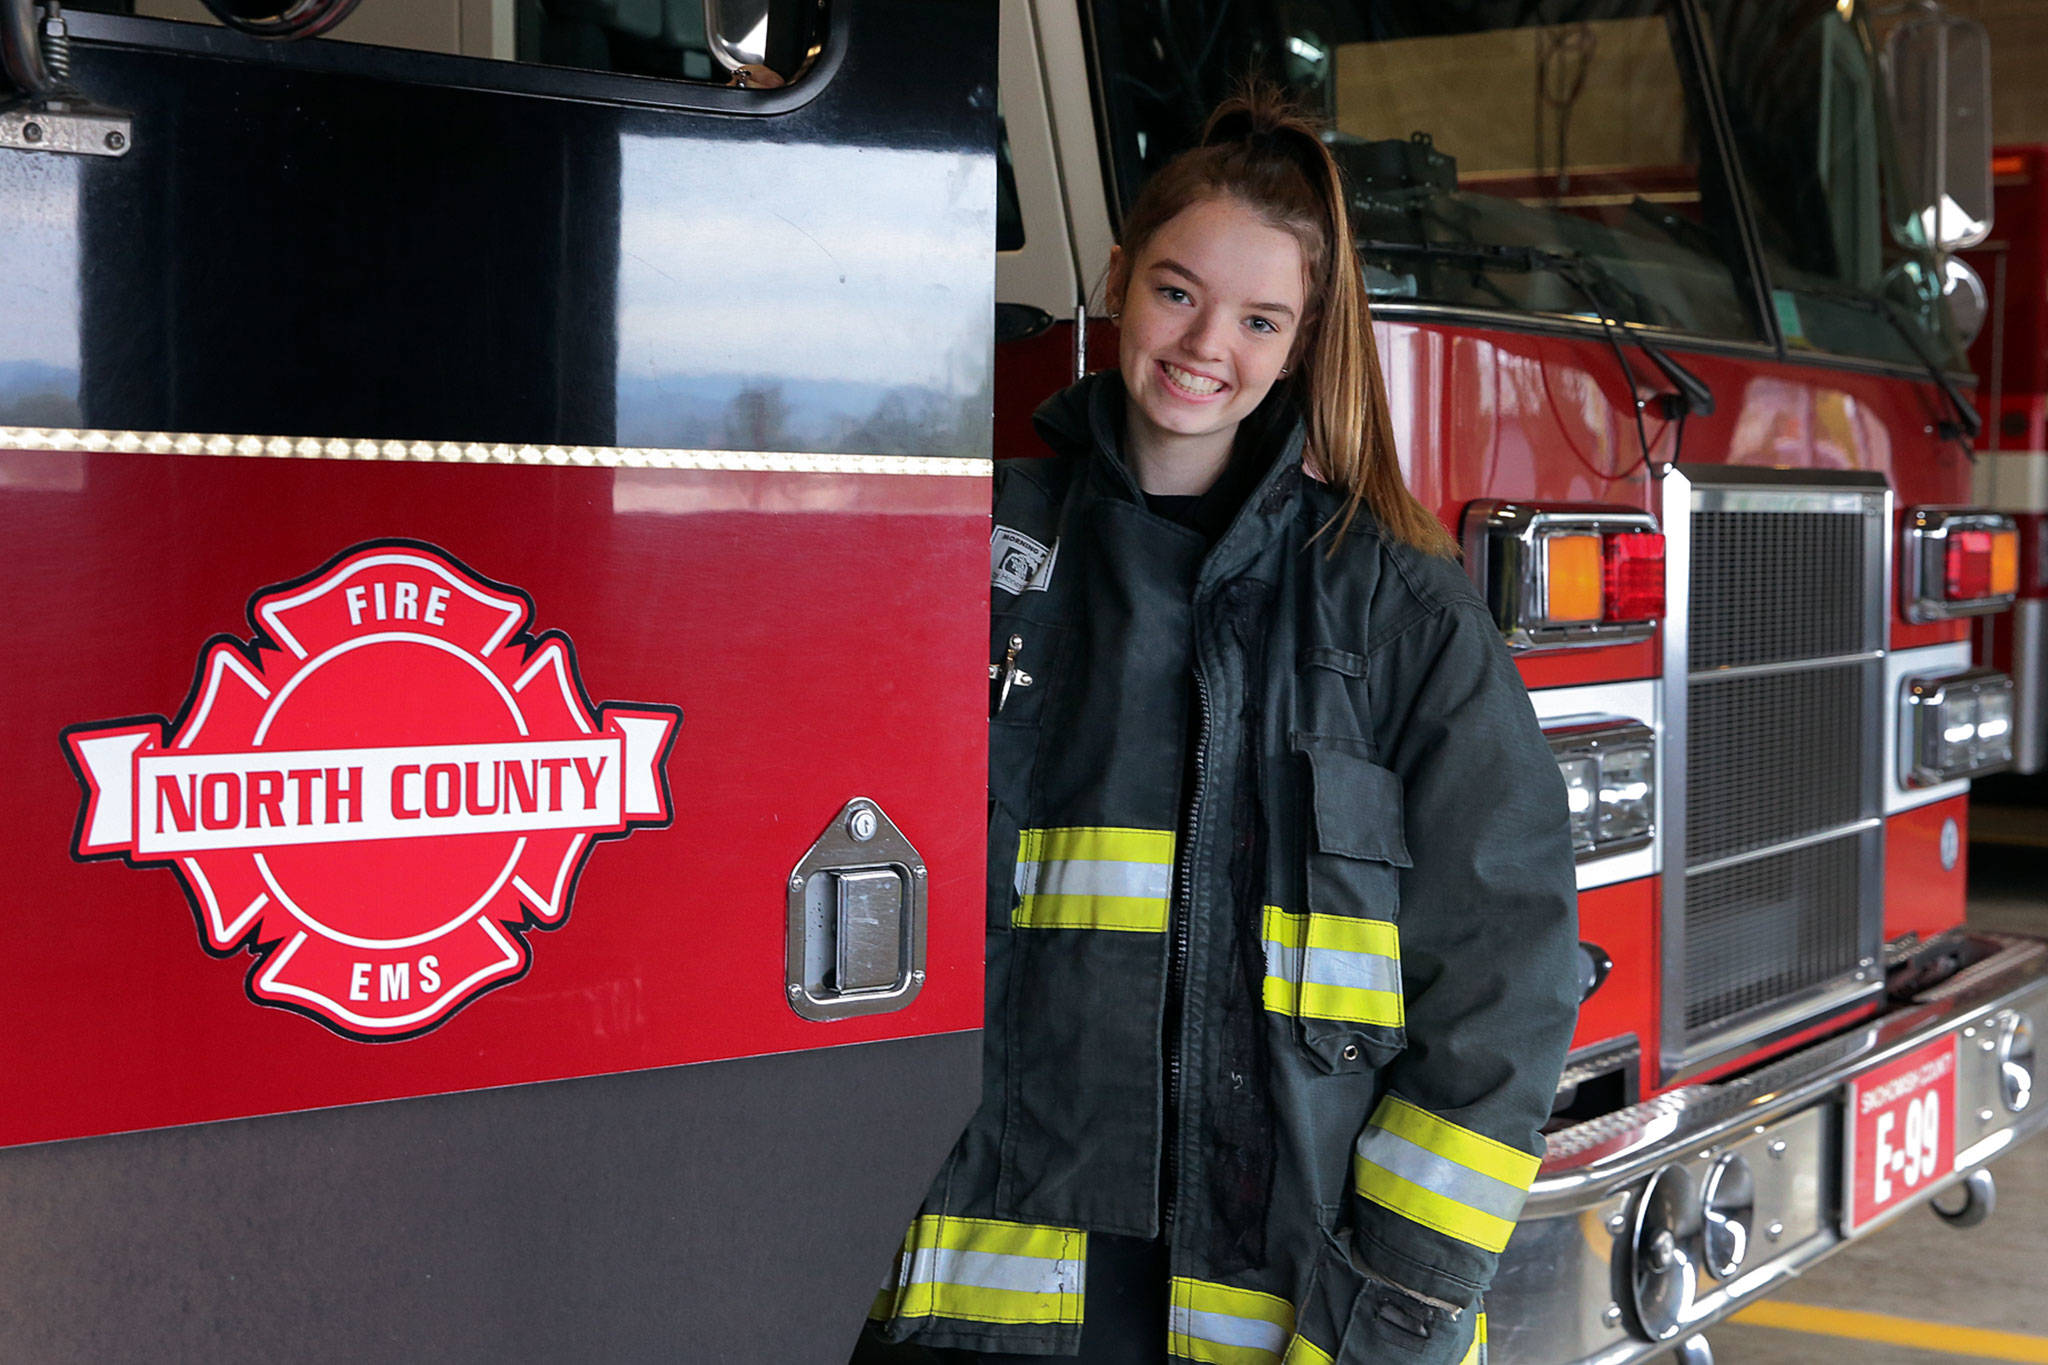 Jessie Bartlett, 17, is a Stanwood student in Running Start and a fire explorer through North County Fire. (Kevin Clark / The Herald)